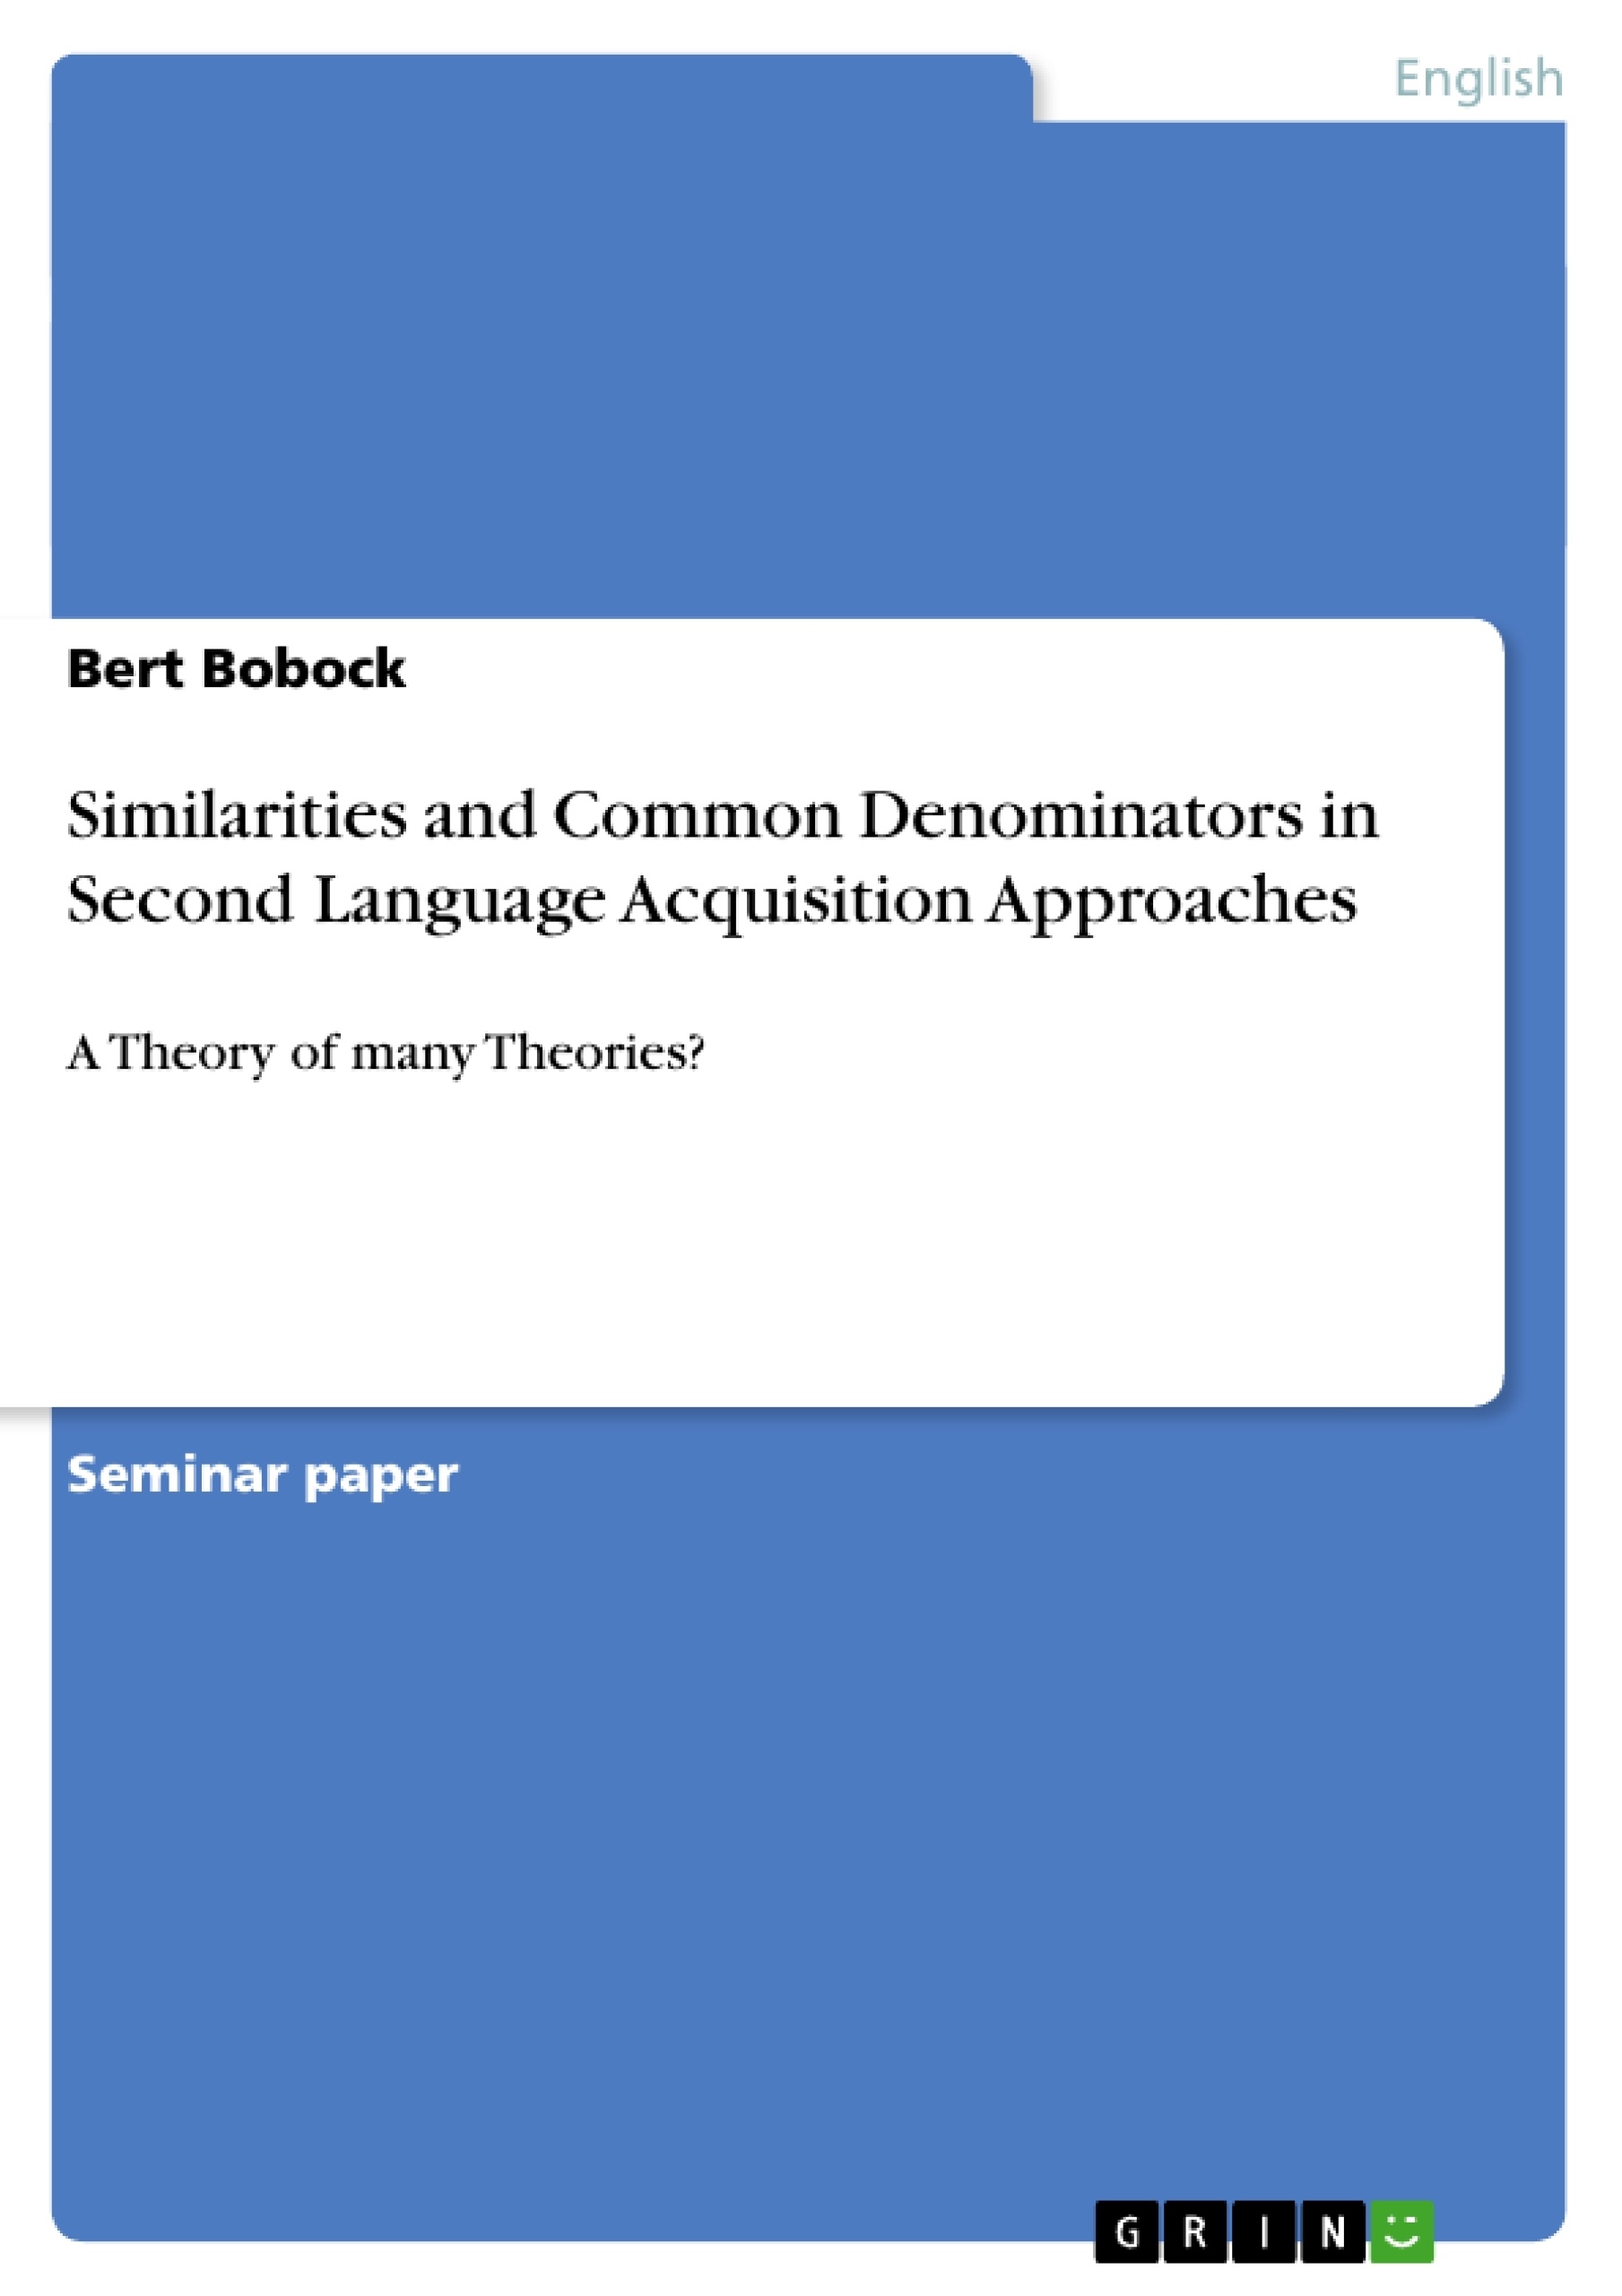 Title: Similarities and Common Denominators in Second Language Acquisition Approaches